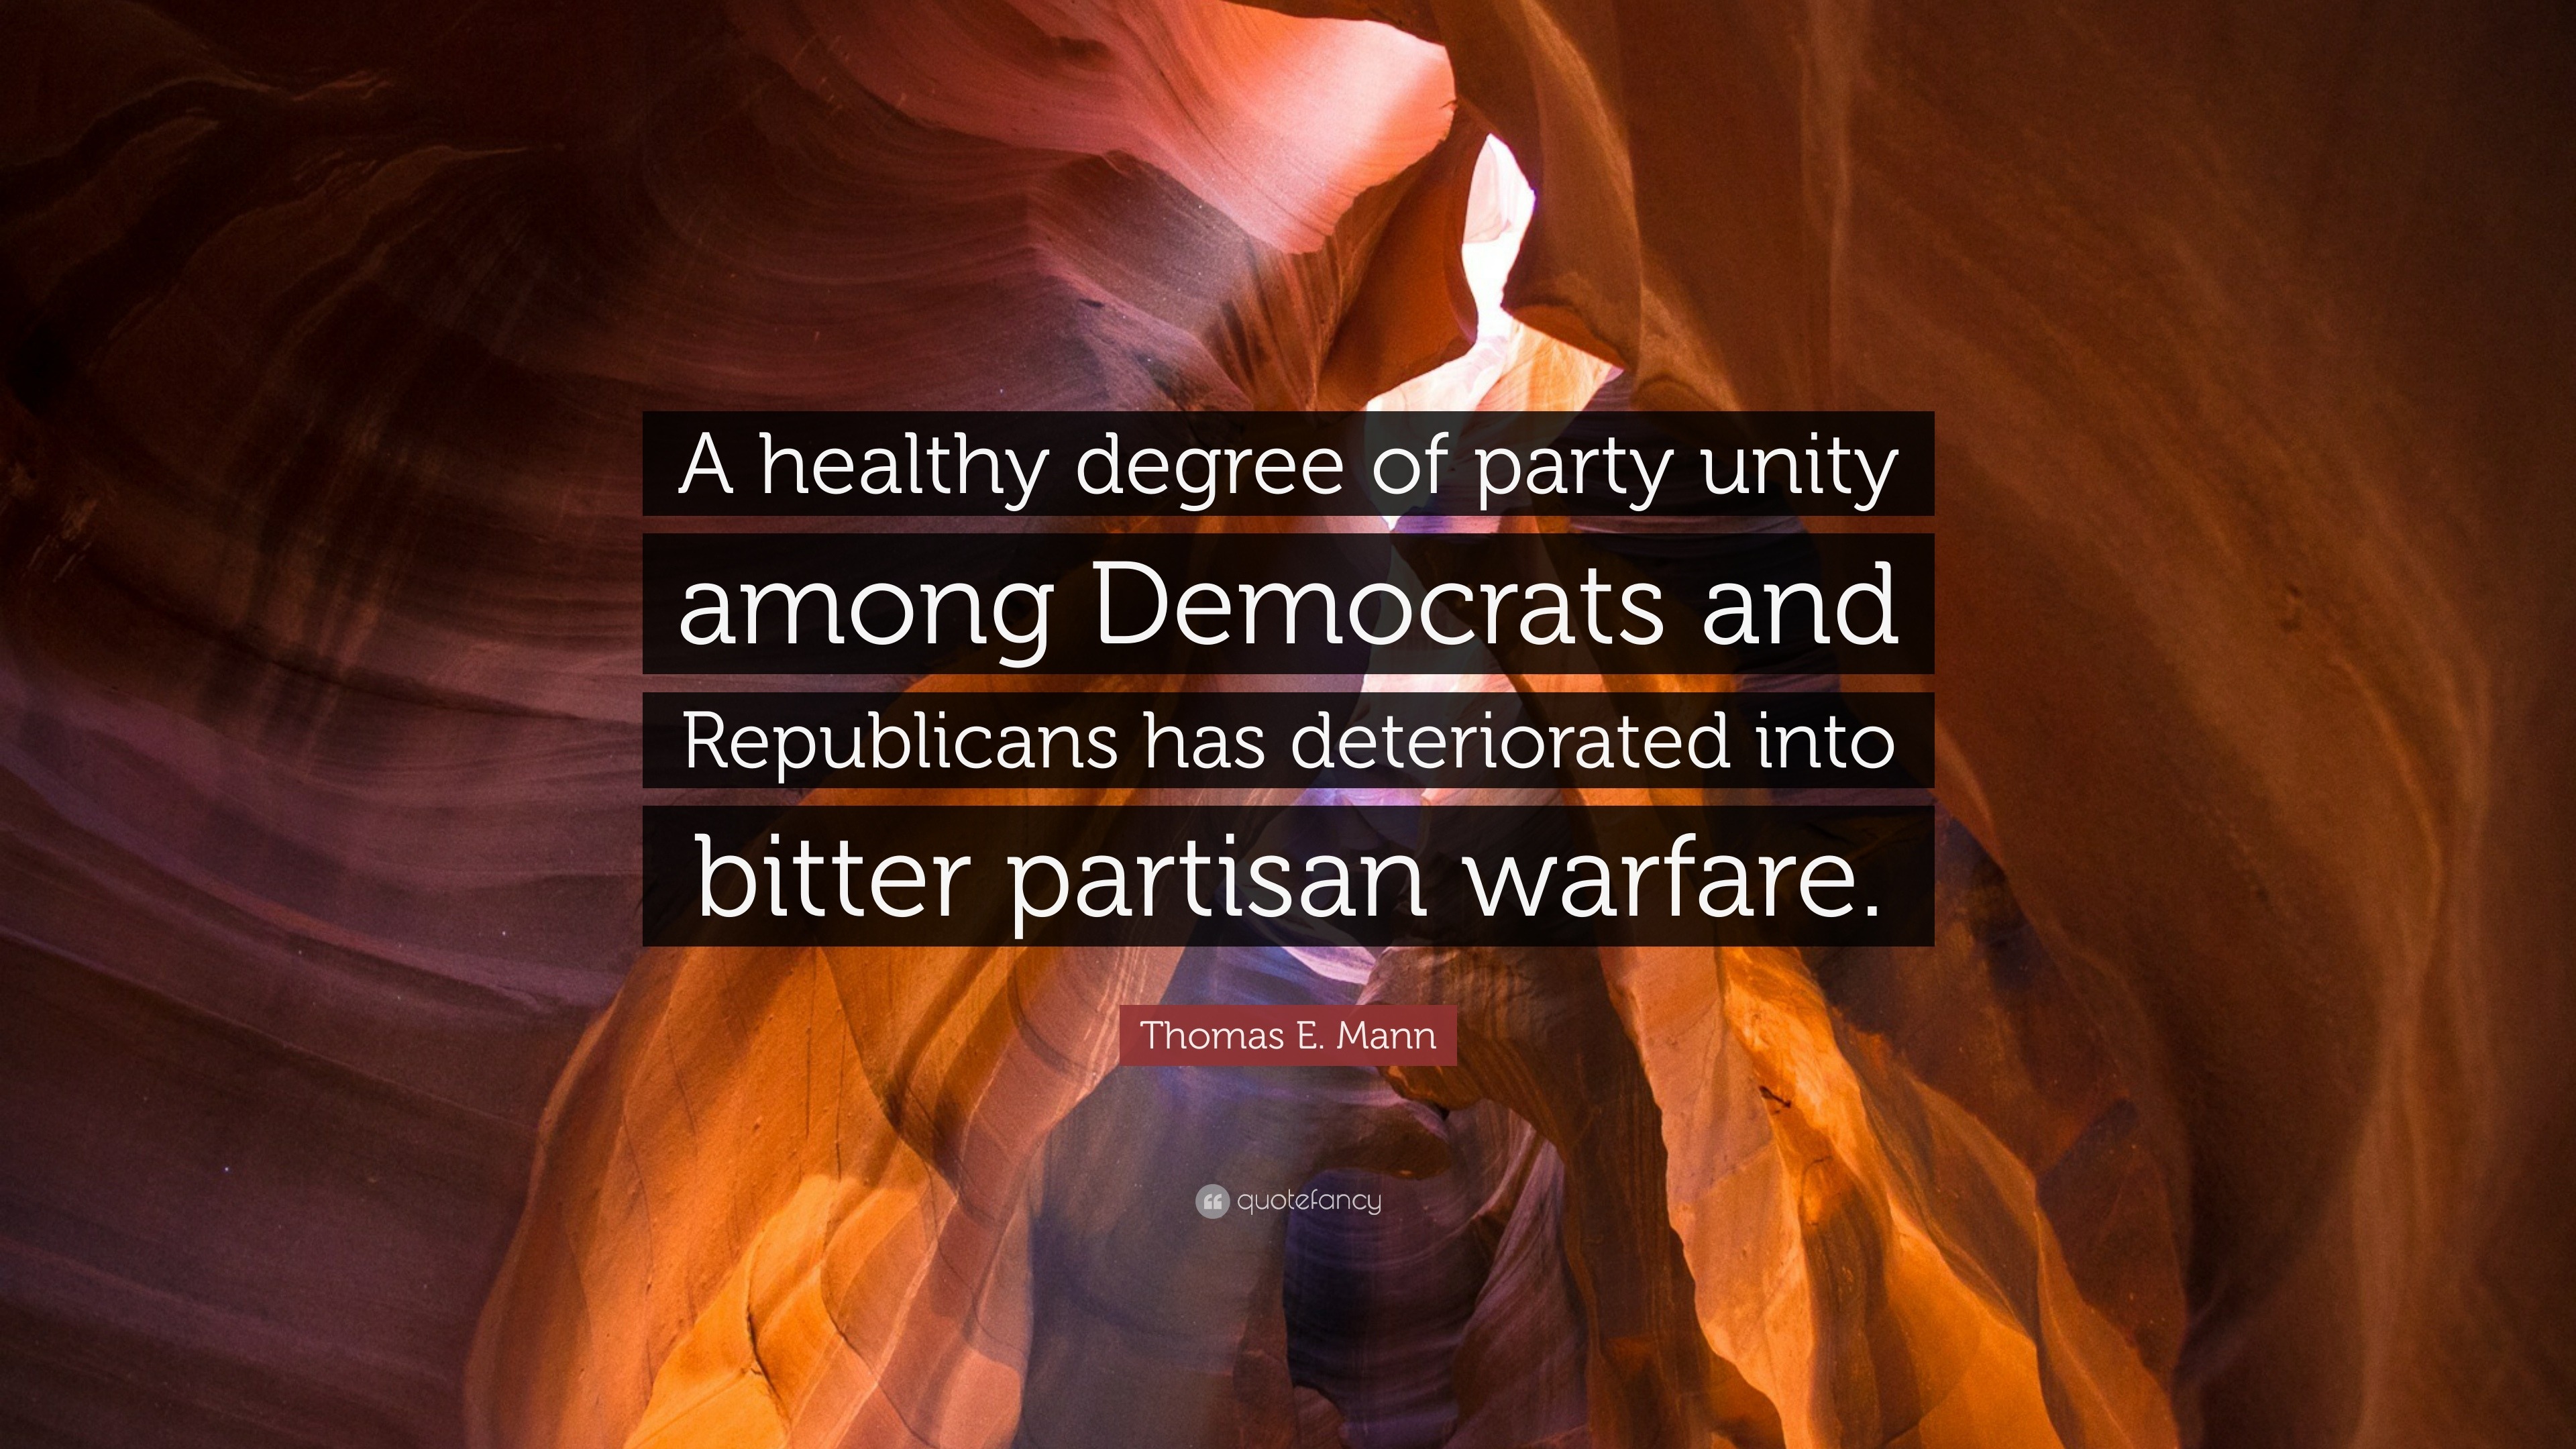 Thomas E Mann Quote “a Healthy Degree Of Party Unity Among Democrats And Republicans Has 8808